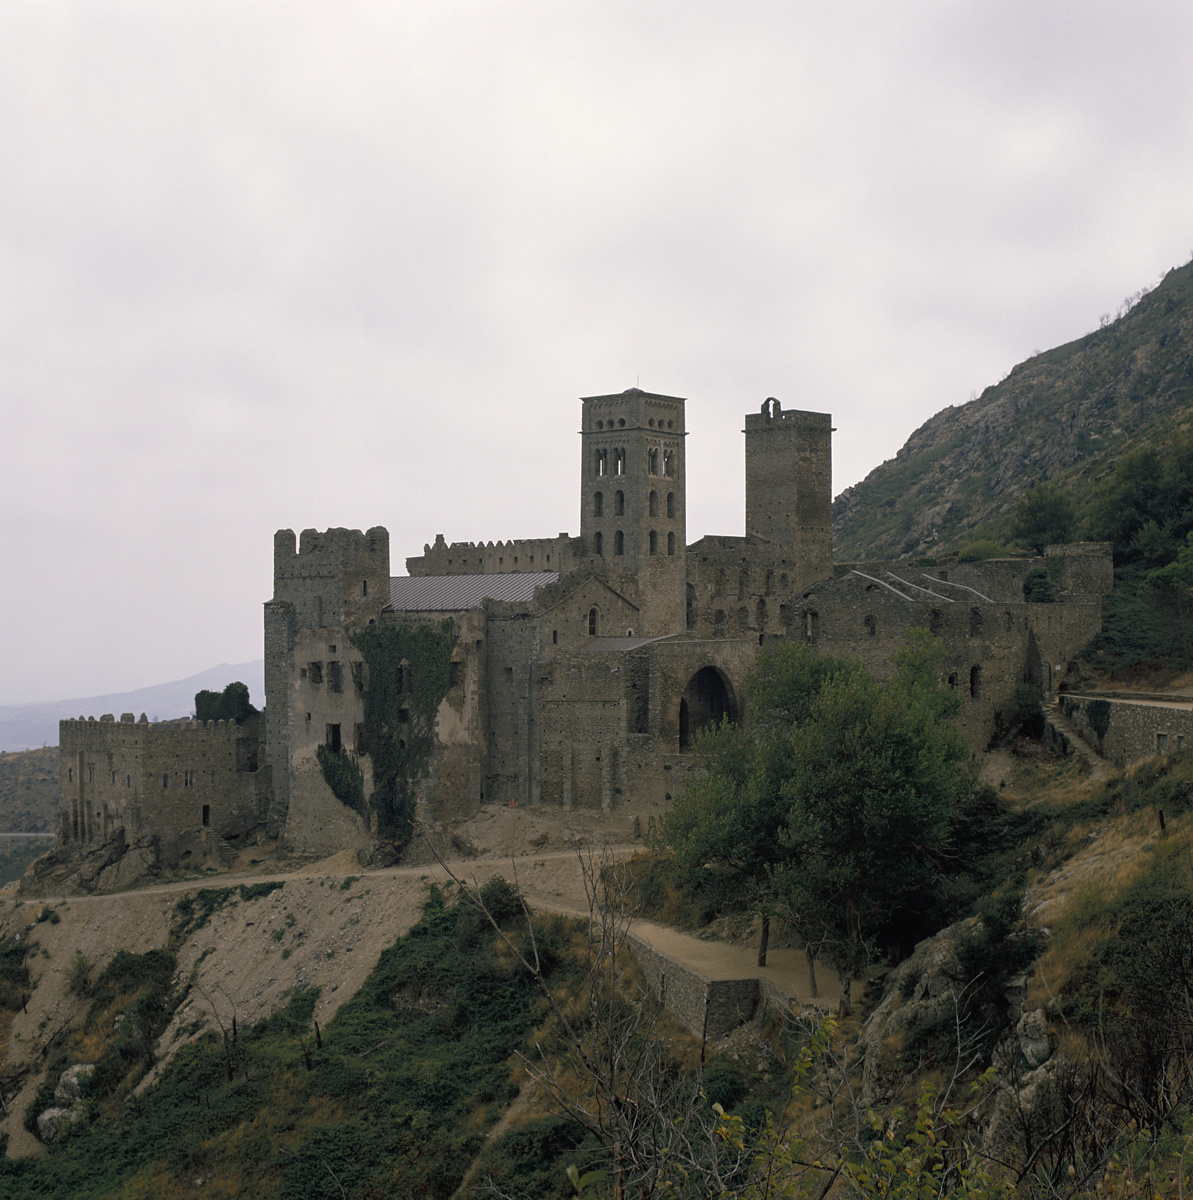  Interventions in the Monastery of Sant Pere de Rodes